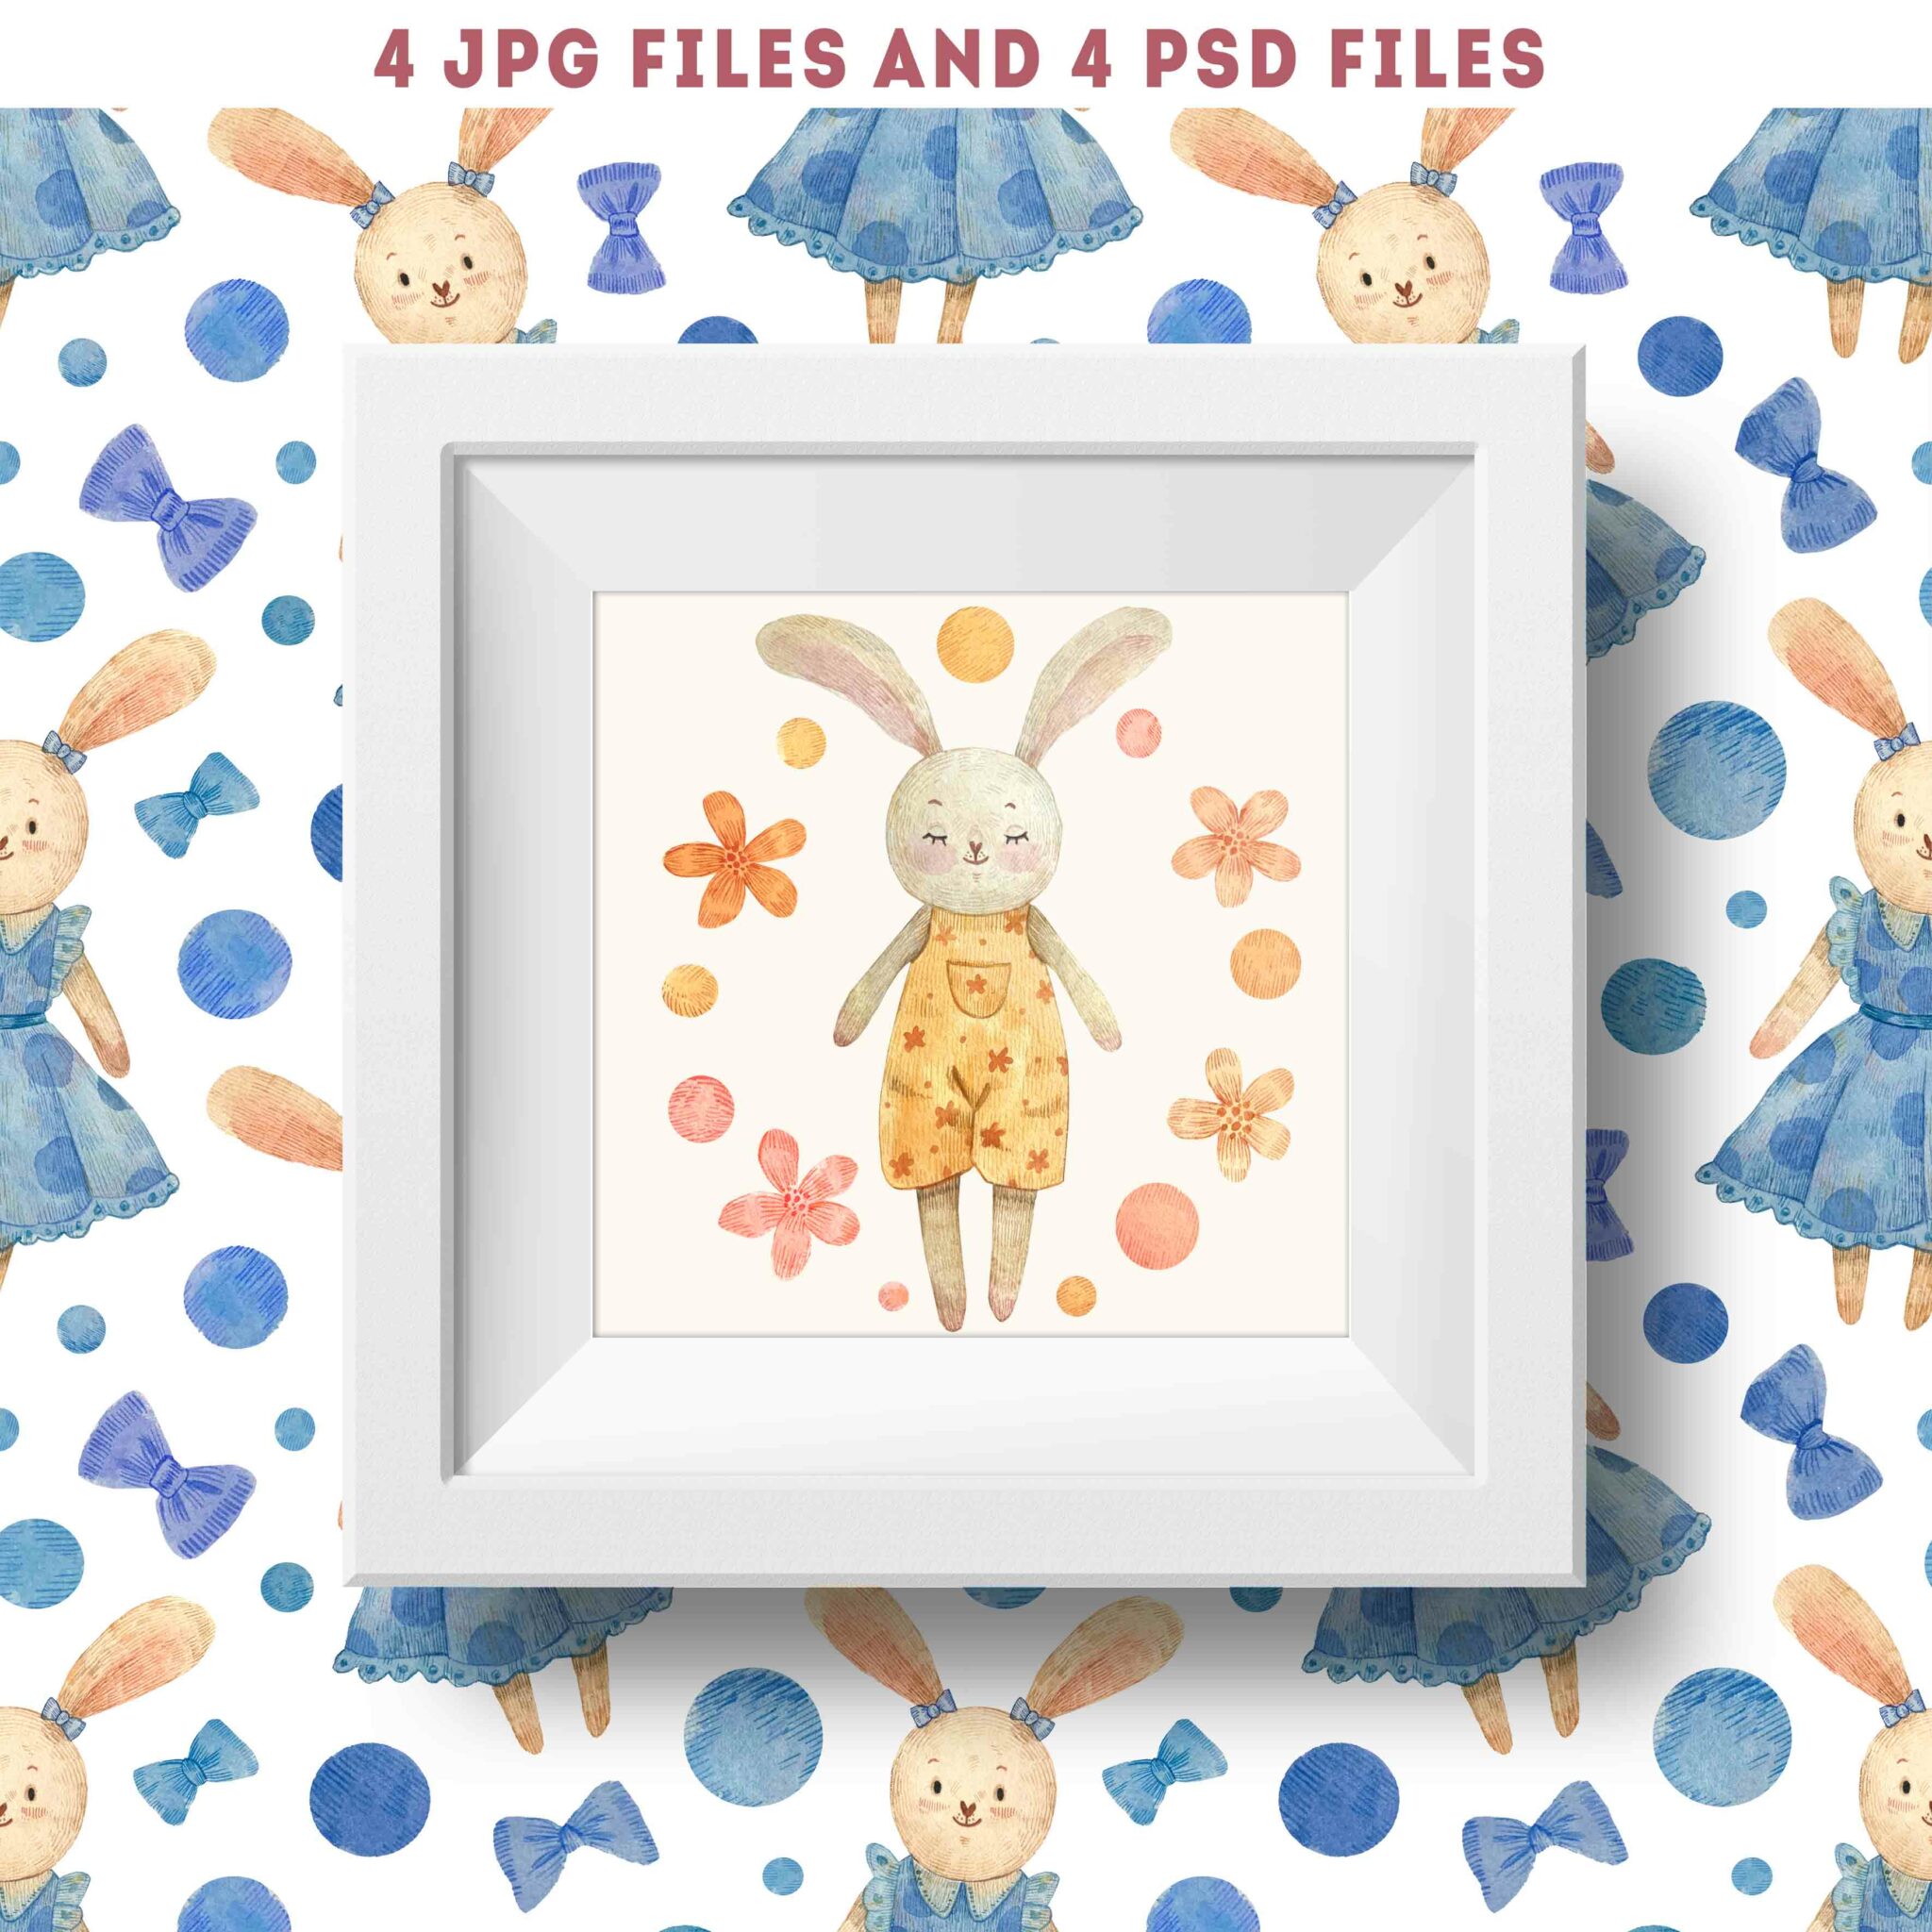 2 Seamless Watercolor Patterns and Illustrations cover image.